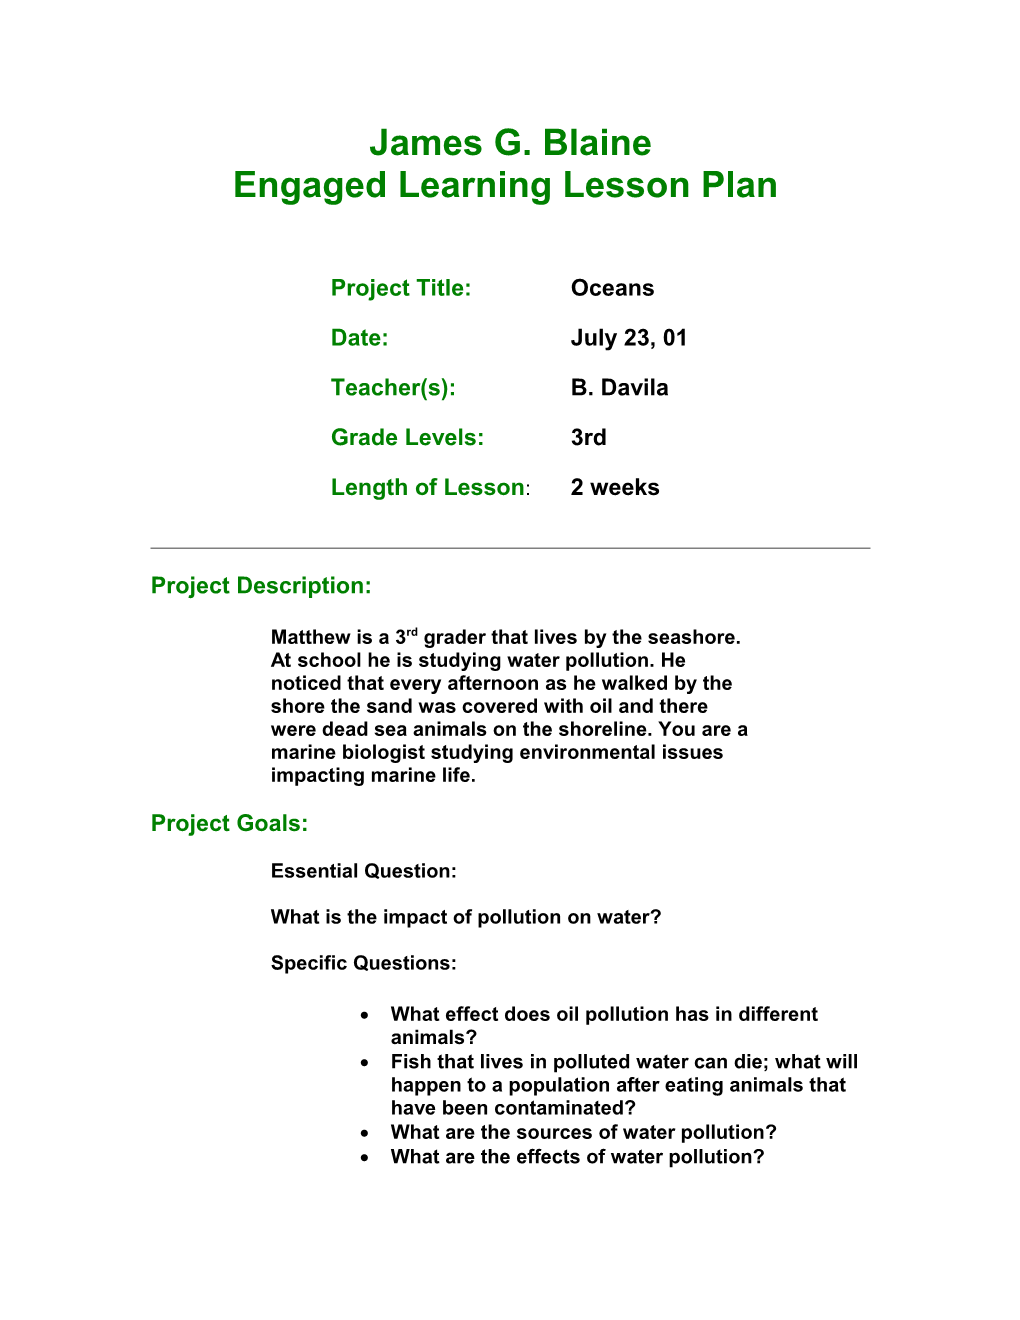 Engaged Learning Lesson Plan